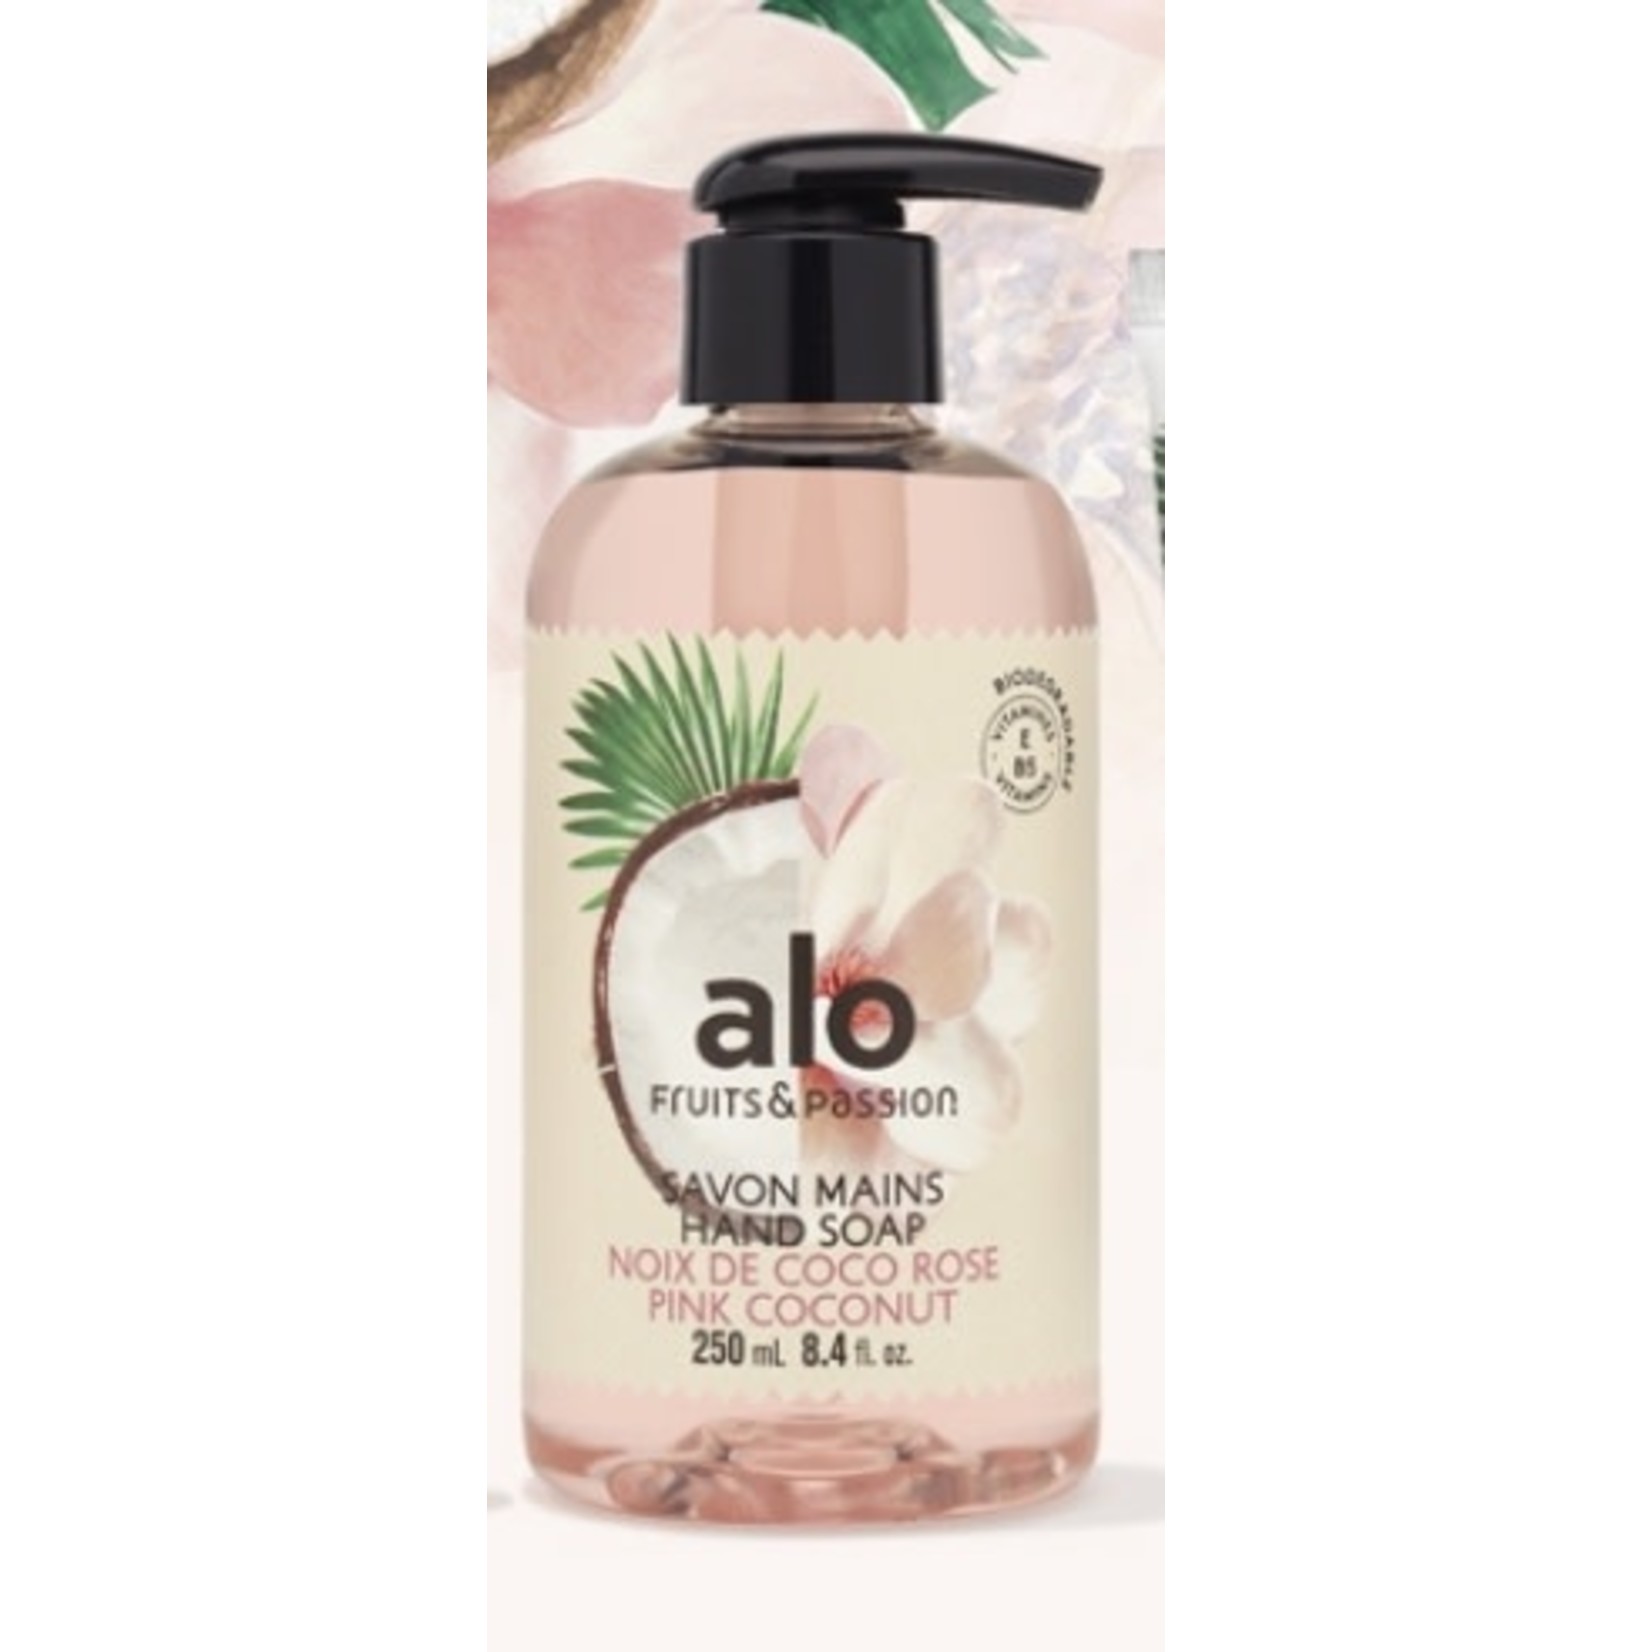 ALO FRUITS & PASSION FRUITS & PASSION Hand Soap 250ml - Pink Coconut DNR